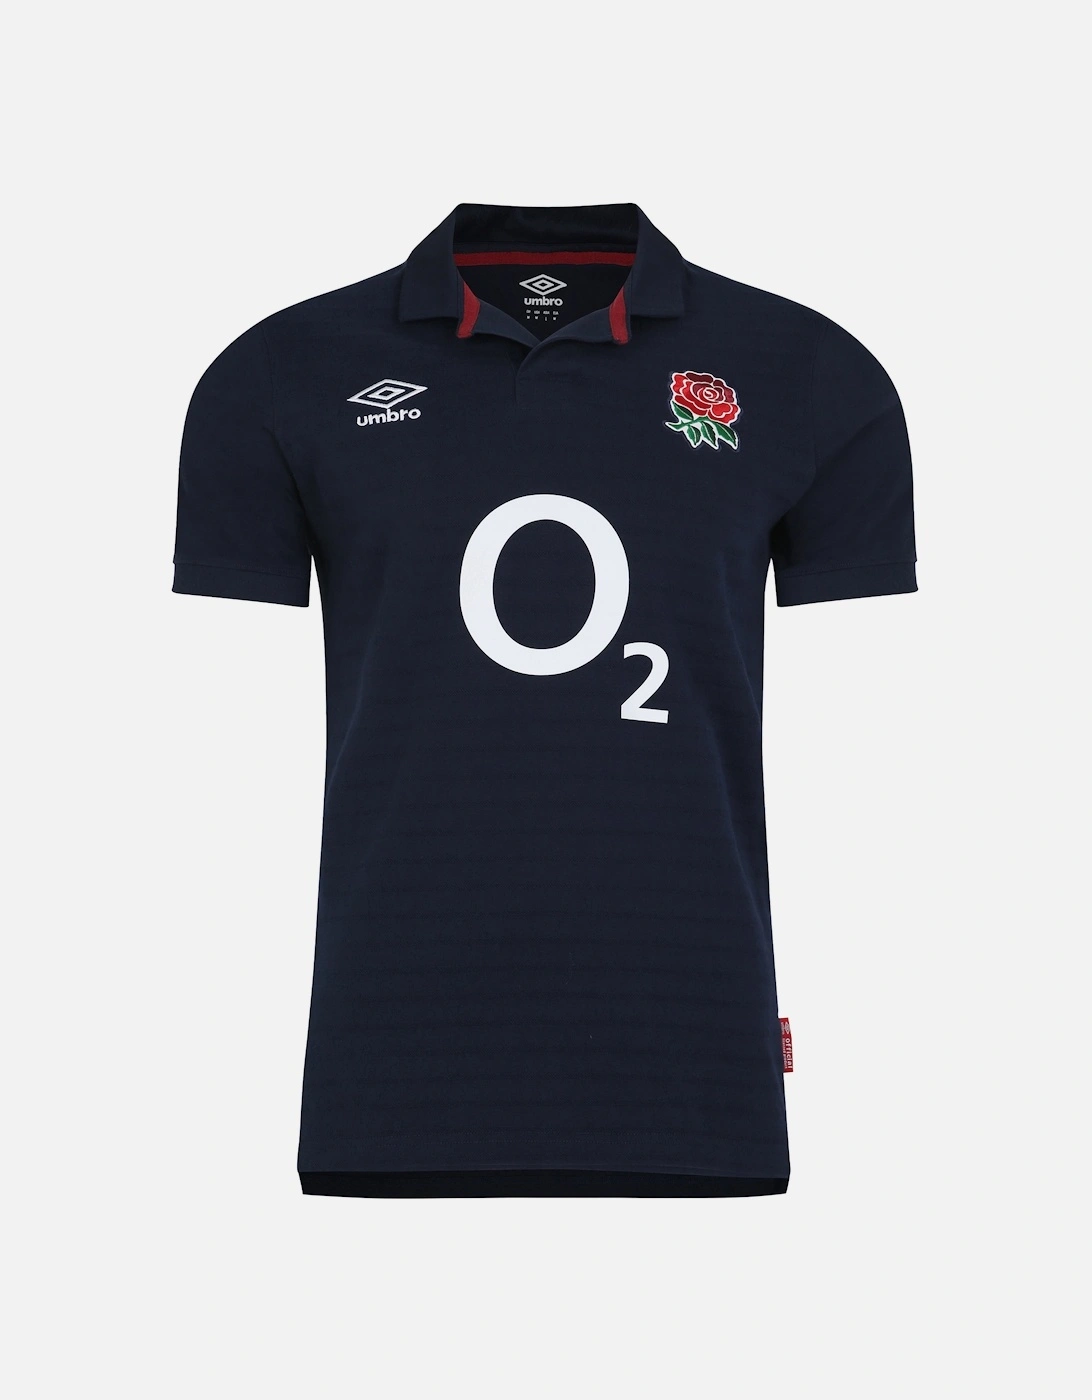 Unisex Adult 23/24 England Rugby Alternative Jersey, 6 of 5